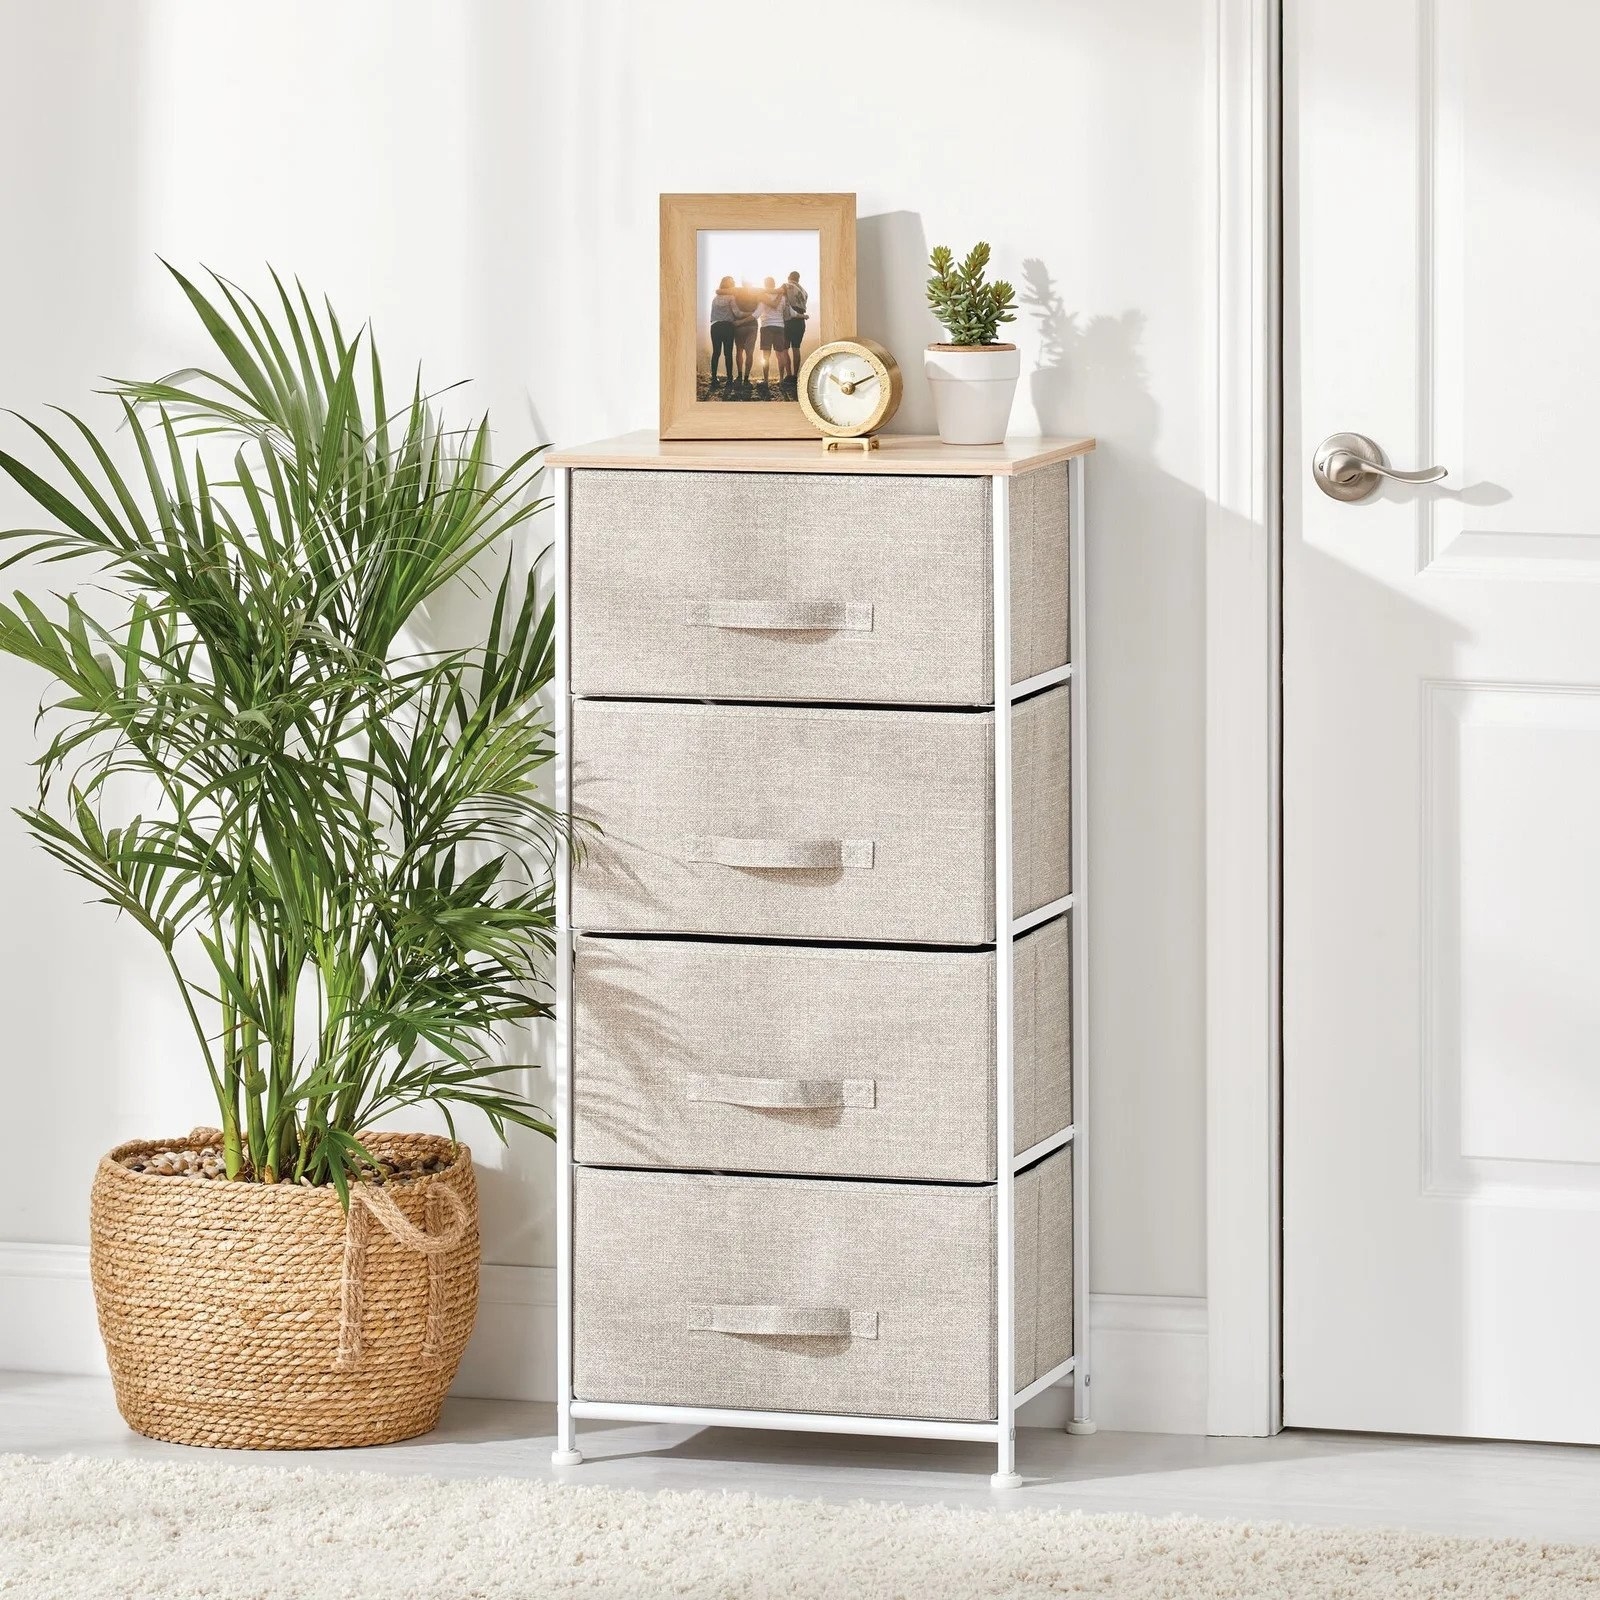 Long 4 drawer dresser with beige canvas drawers and white metal hardware